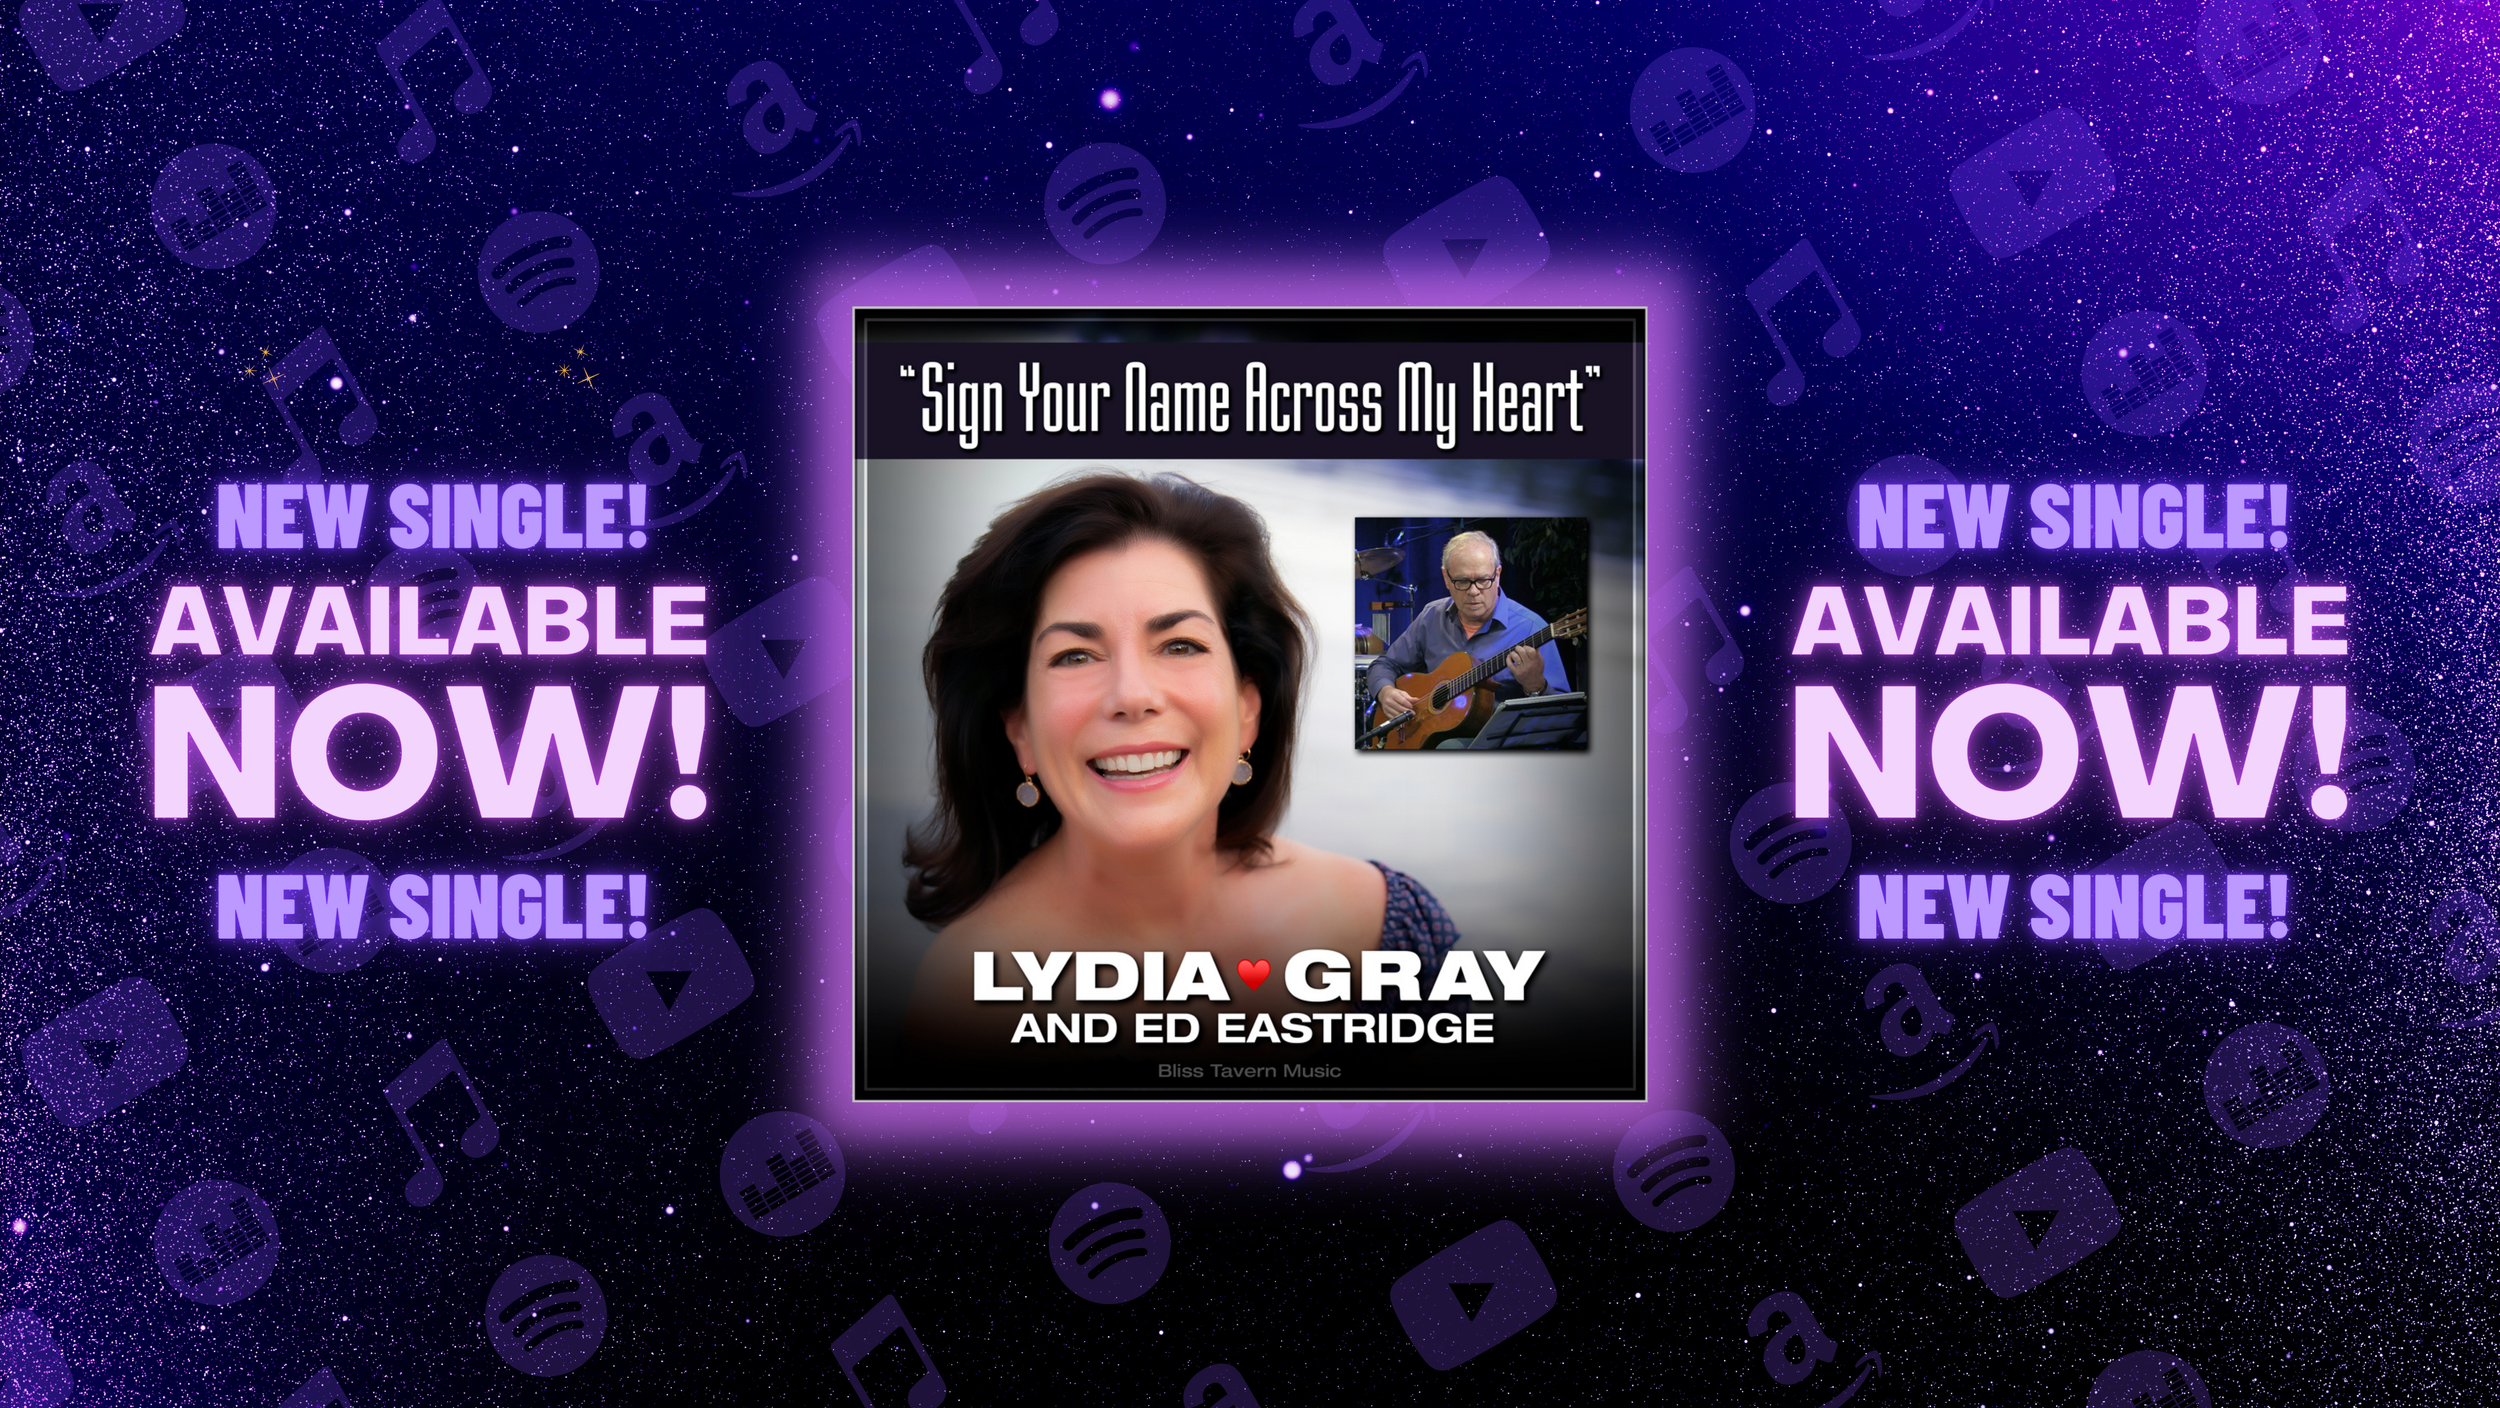 Online social media and profile graphics for marketing musical artist Lydia Gray by SP STUDIOS.